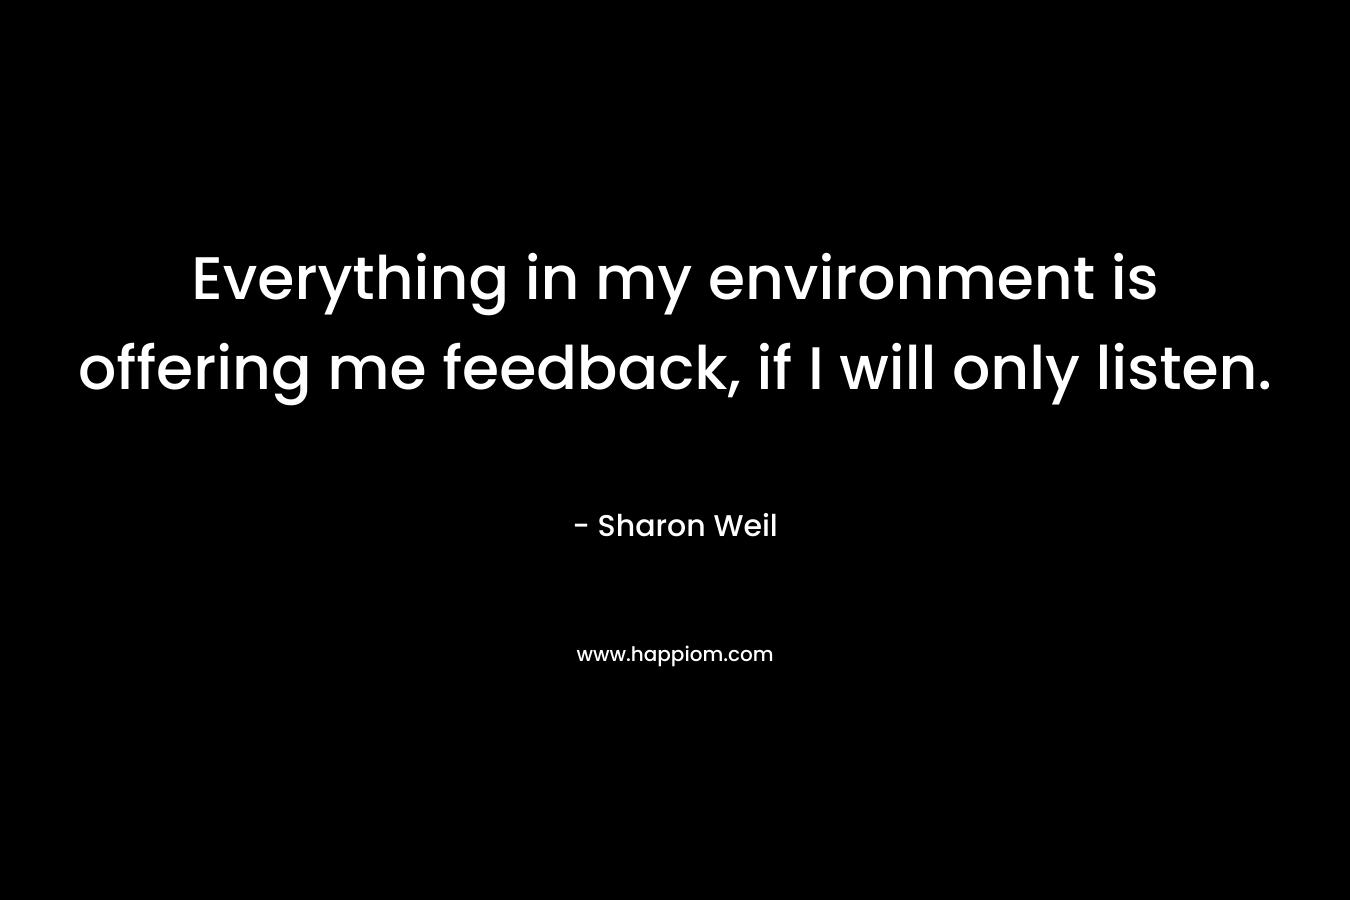 Everything in my environment is offering me feedback, if I will only listen. – Sharon Weil